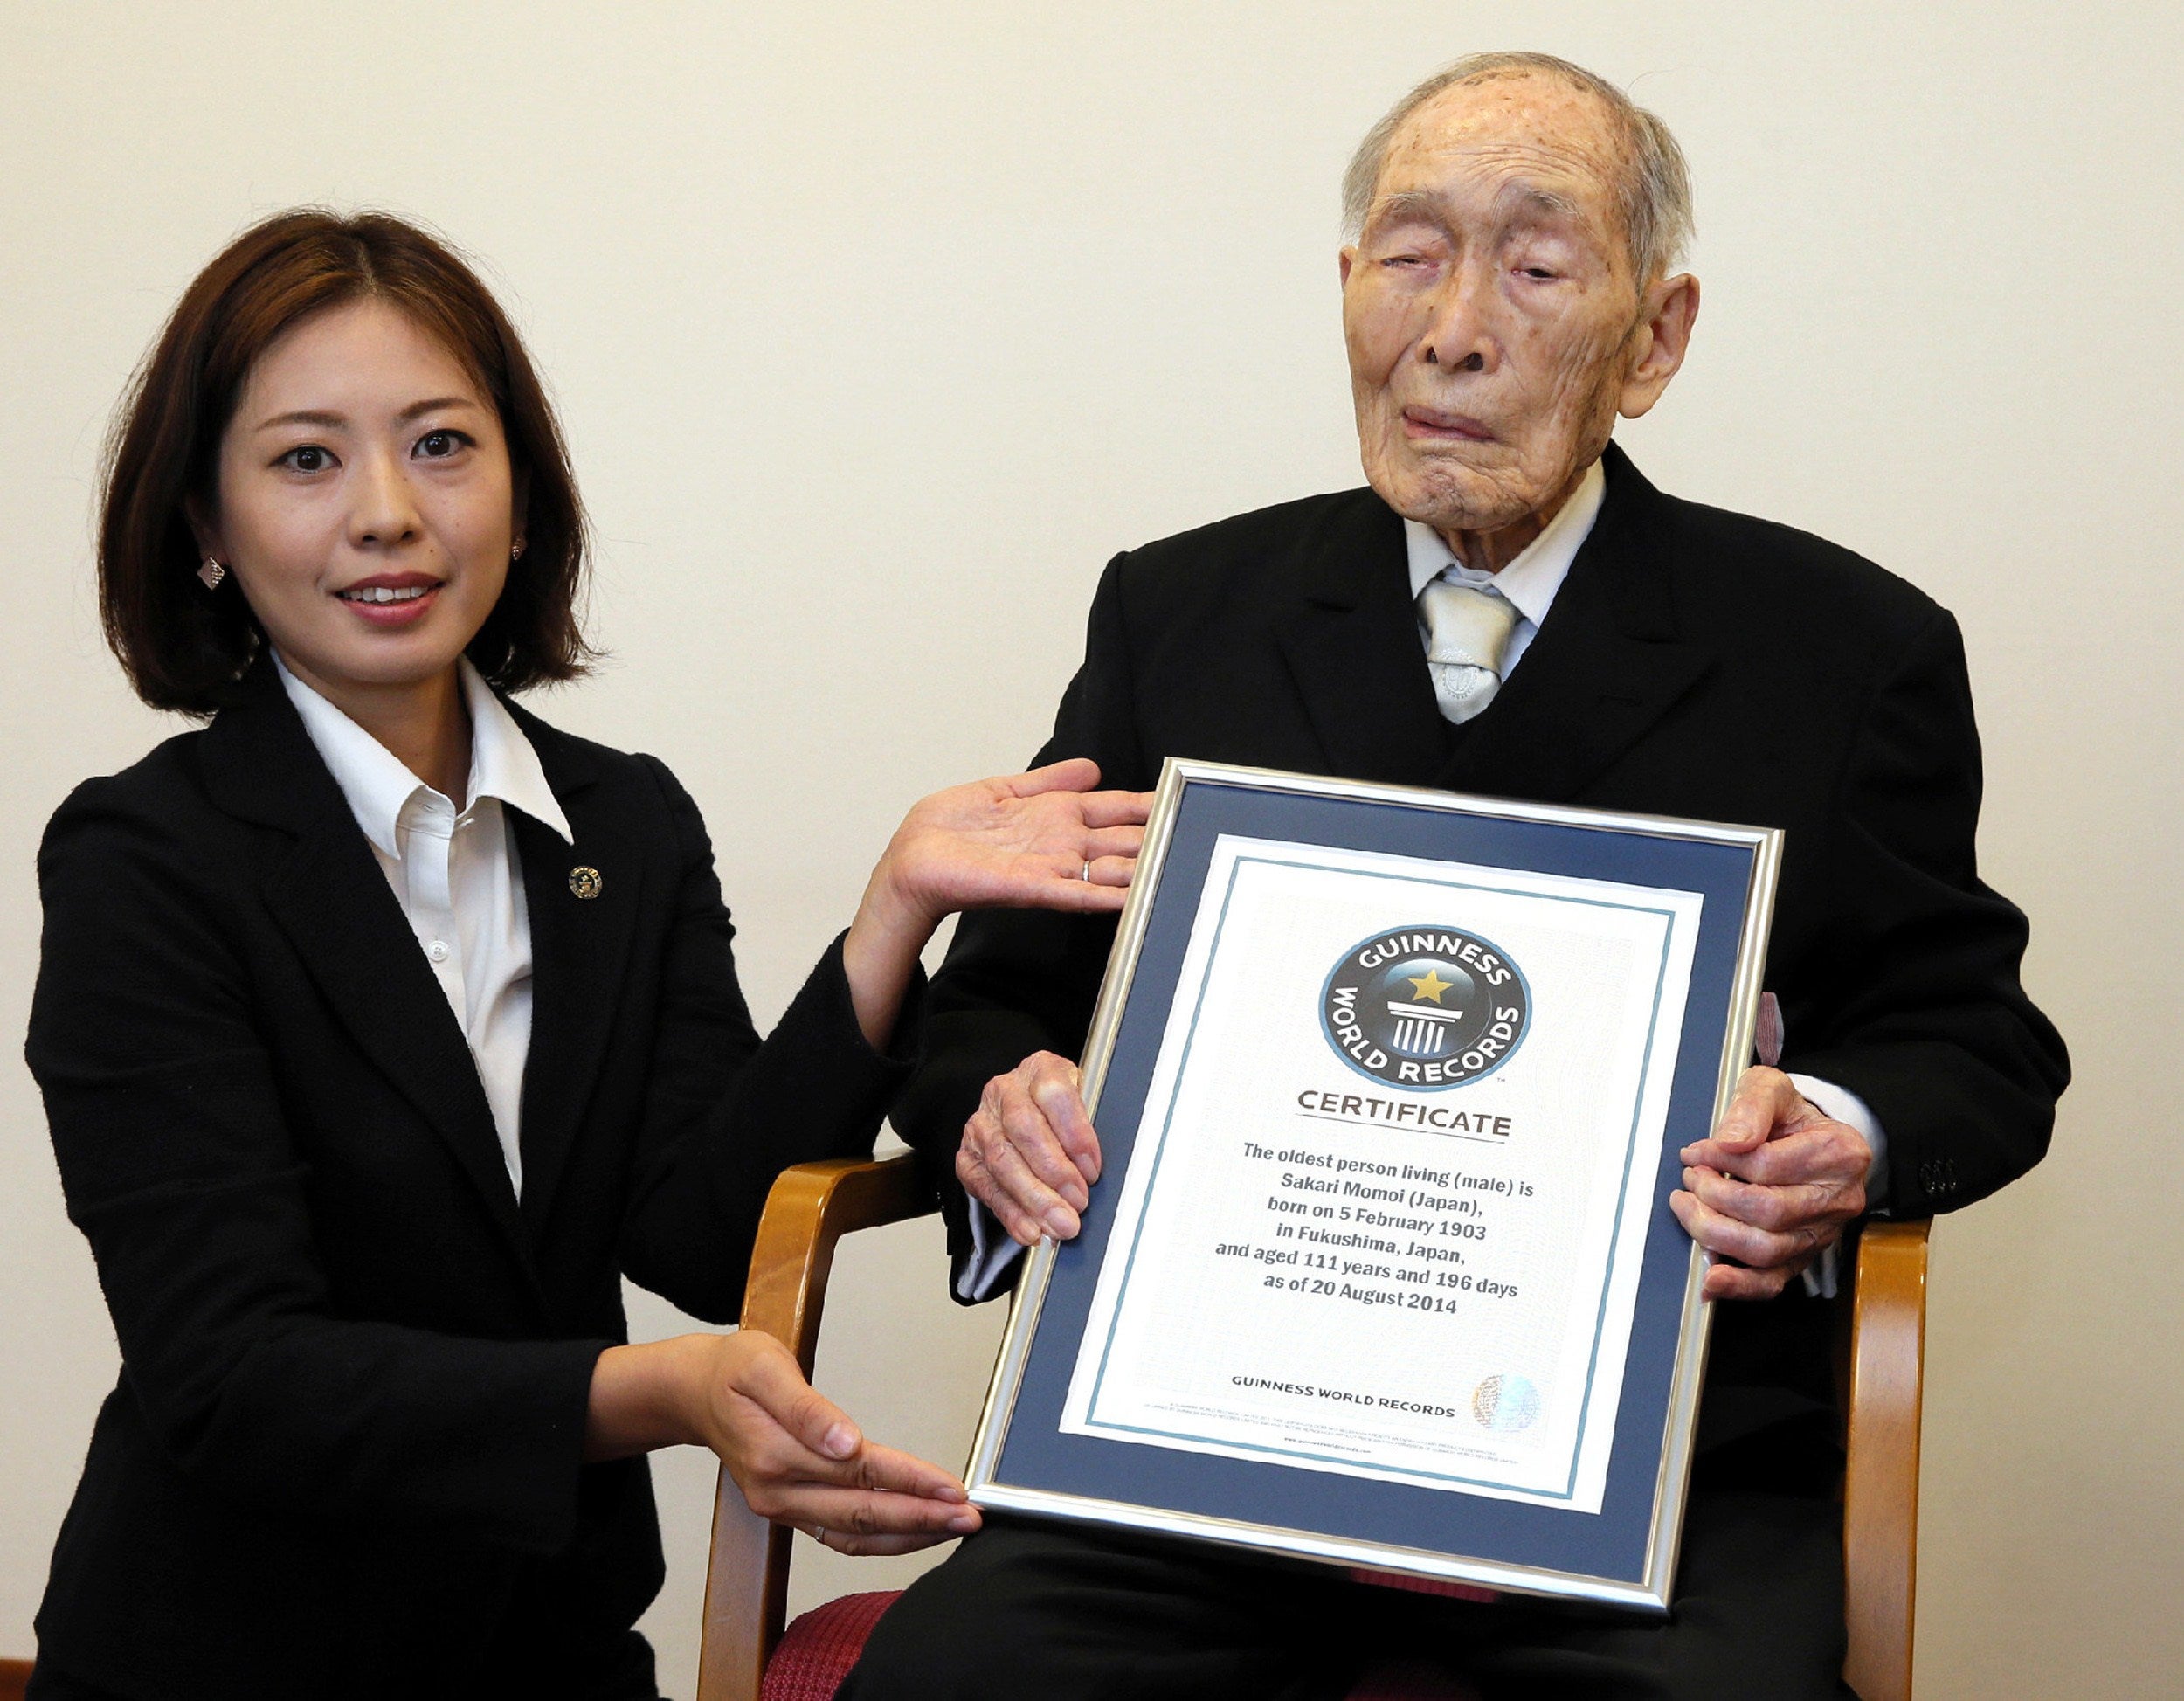 Sakari Momoi was awarded with a certificate in August last year to celebrate becoming the world's oldest man